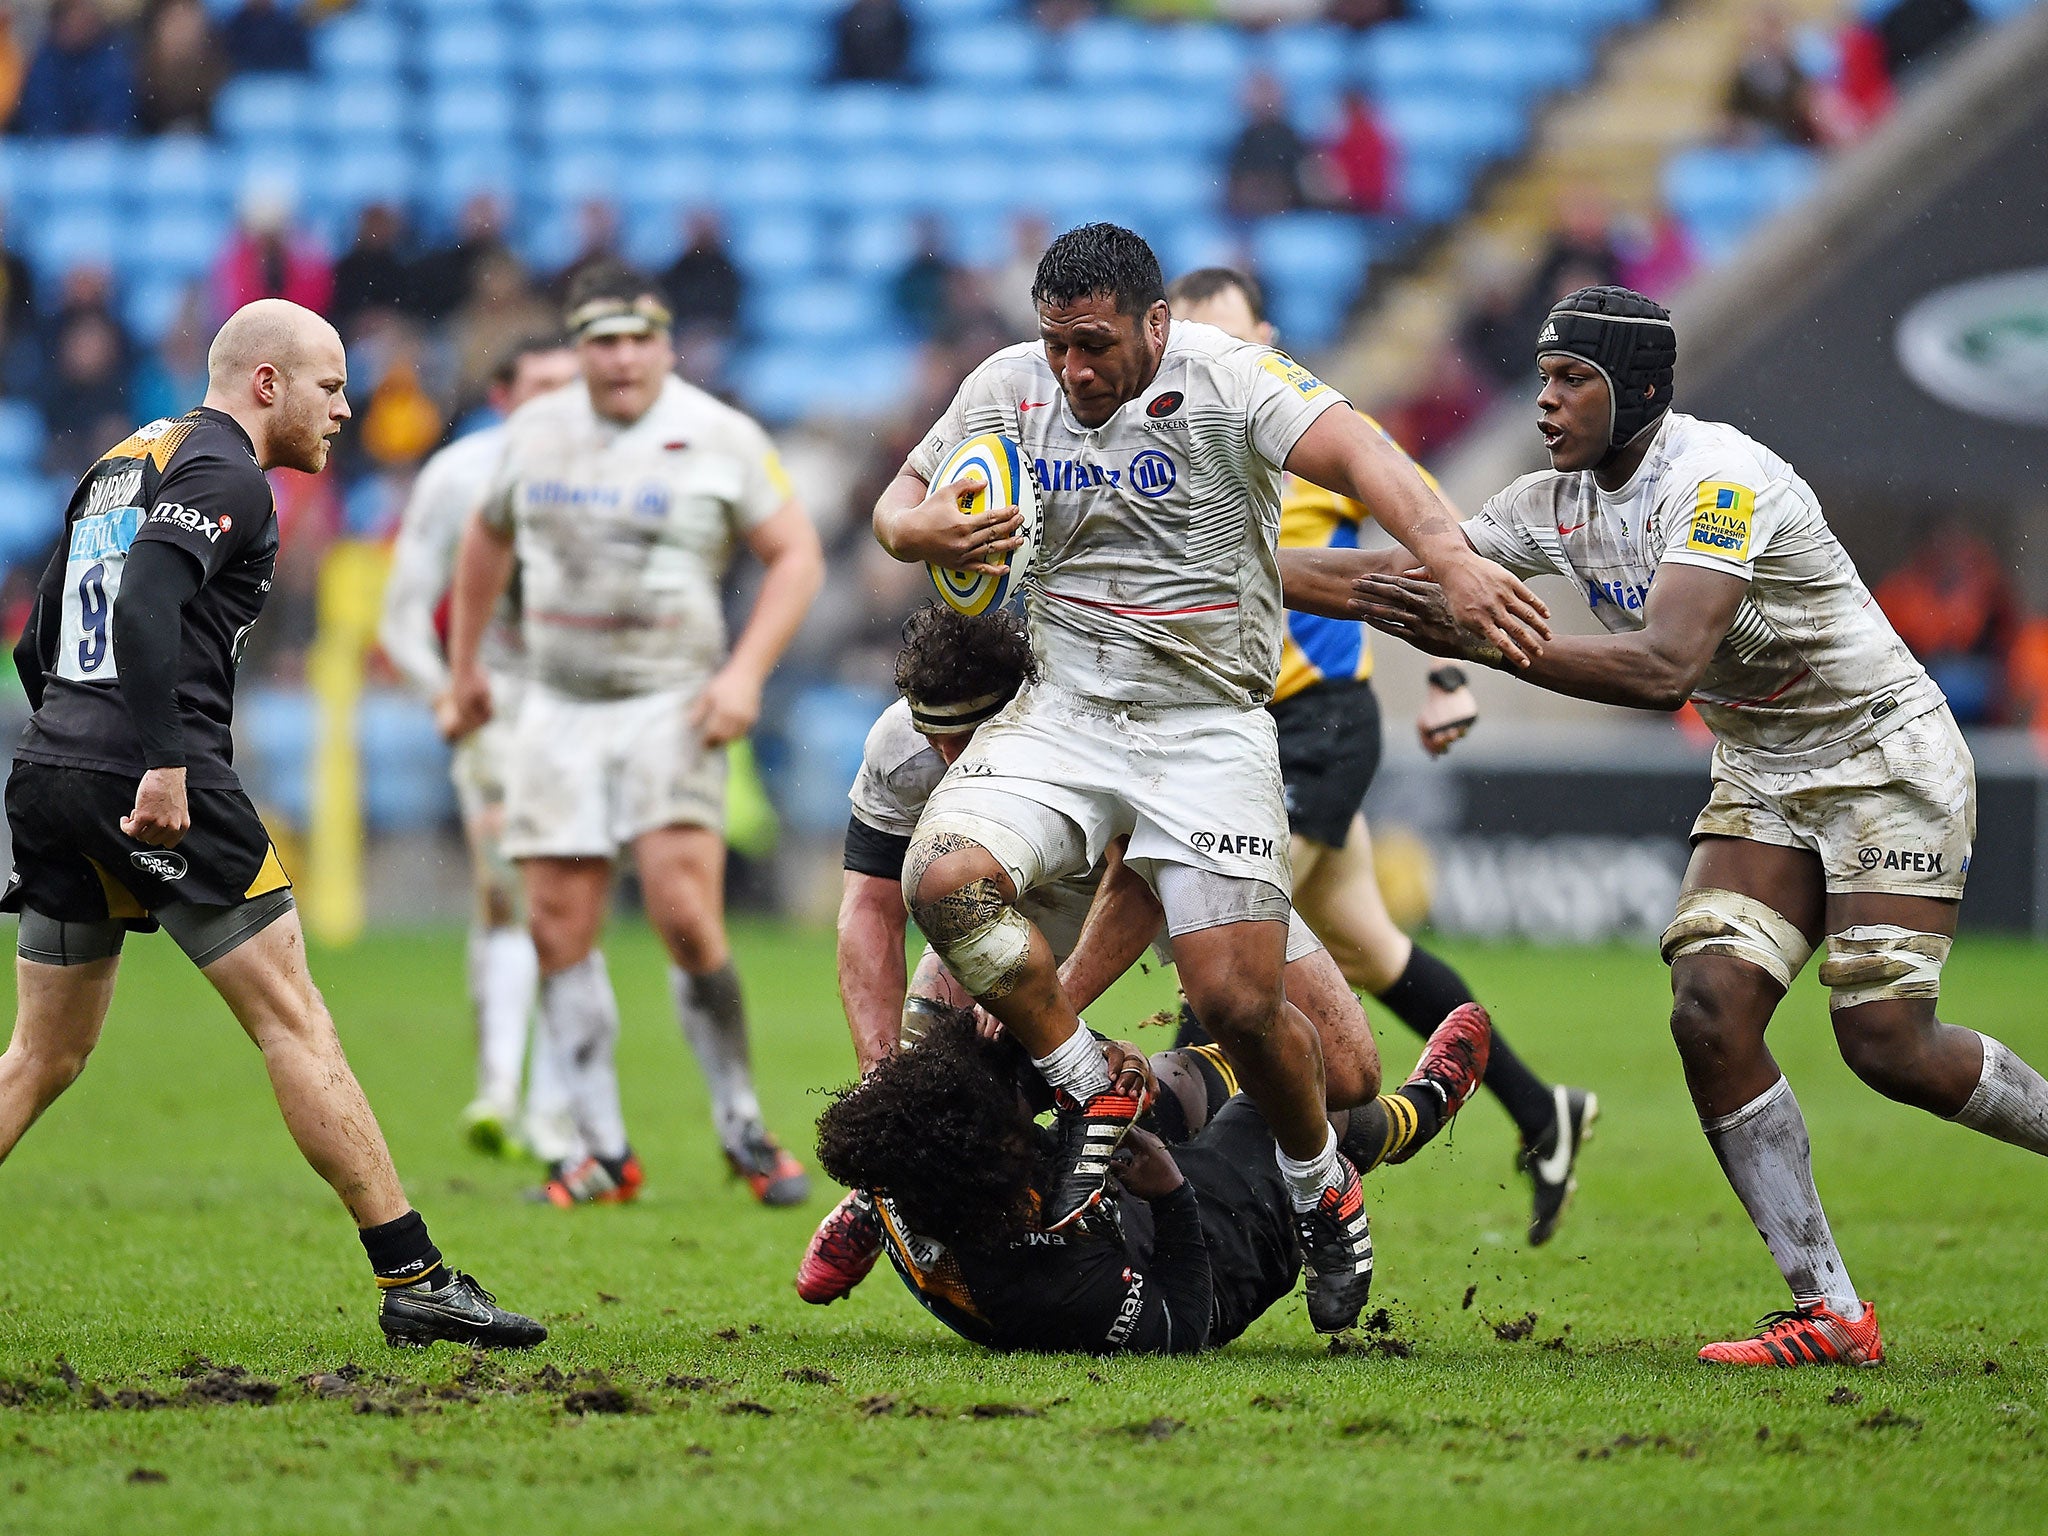 Mako Vunipola, center, being tackled while in action for Saracens